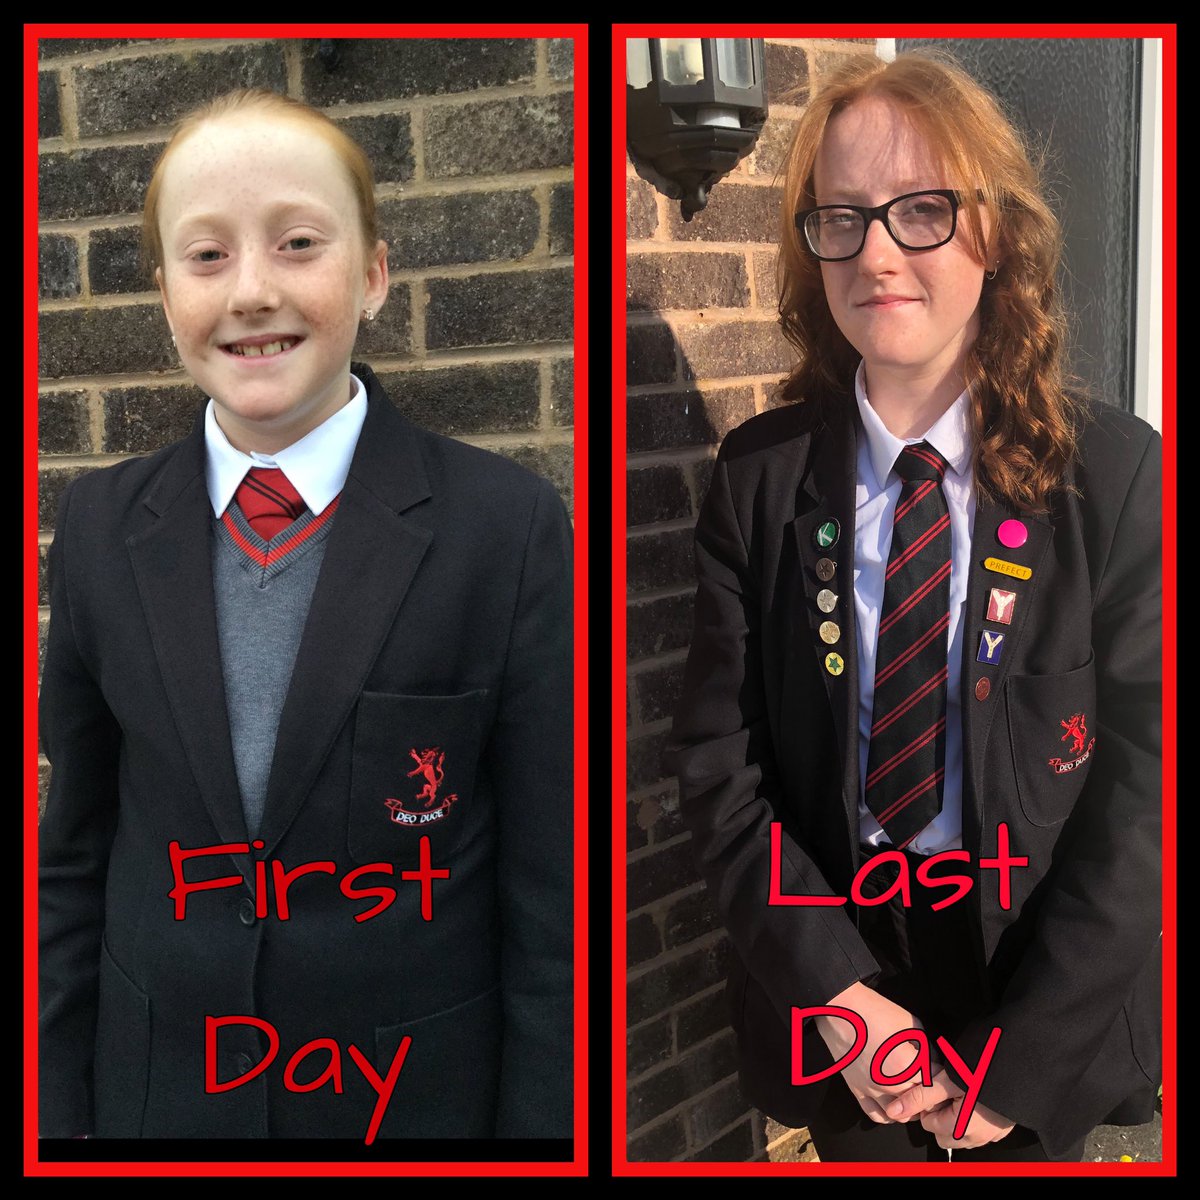 She has officially finished - though there are still some exams to complete. I didn’t think she’d changed much, but Manor has encouraged her to grow into a responsible, caring young individual. #EndOfAnEra